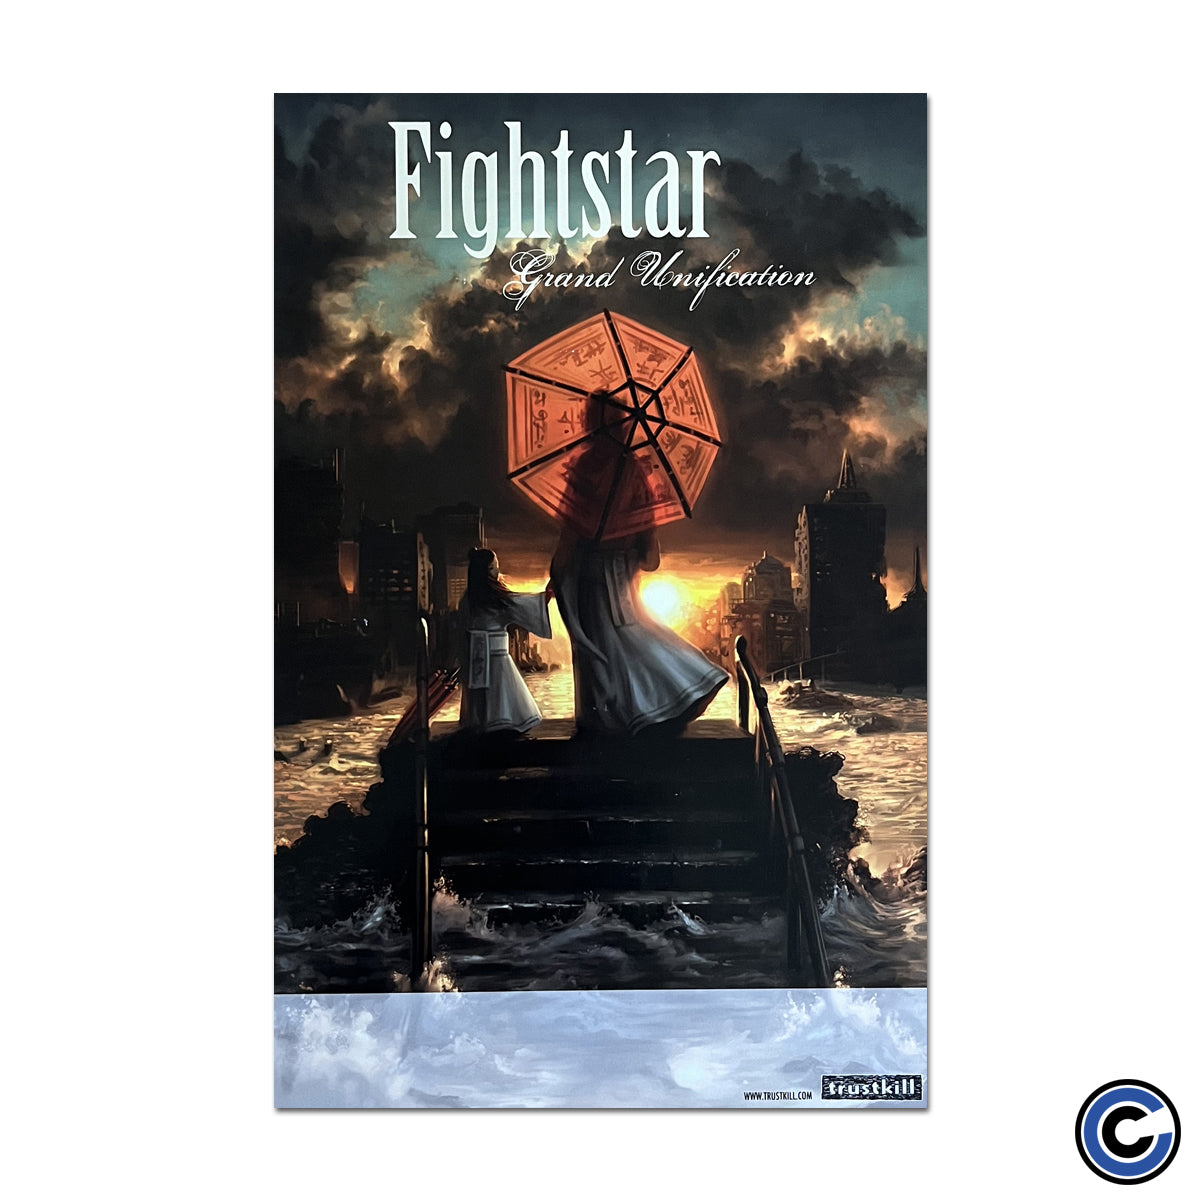 Fightstar "Grand Unification" Poster